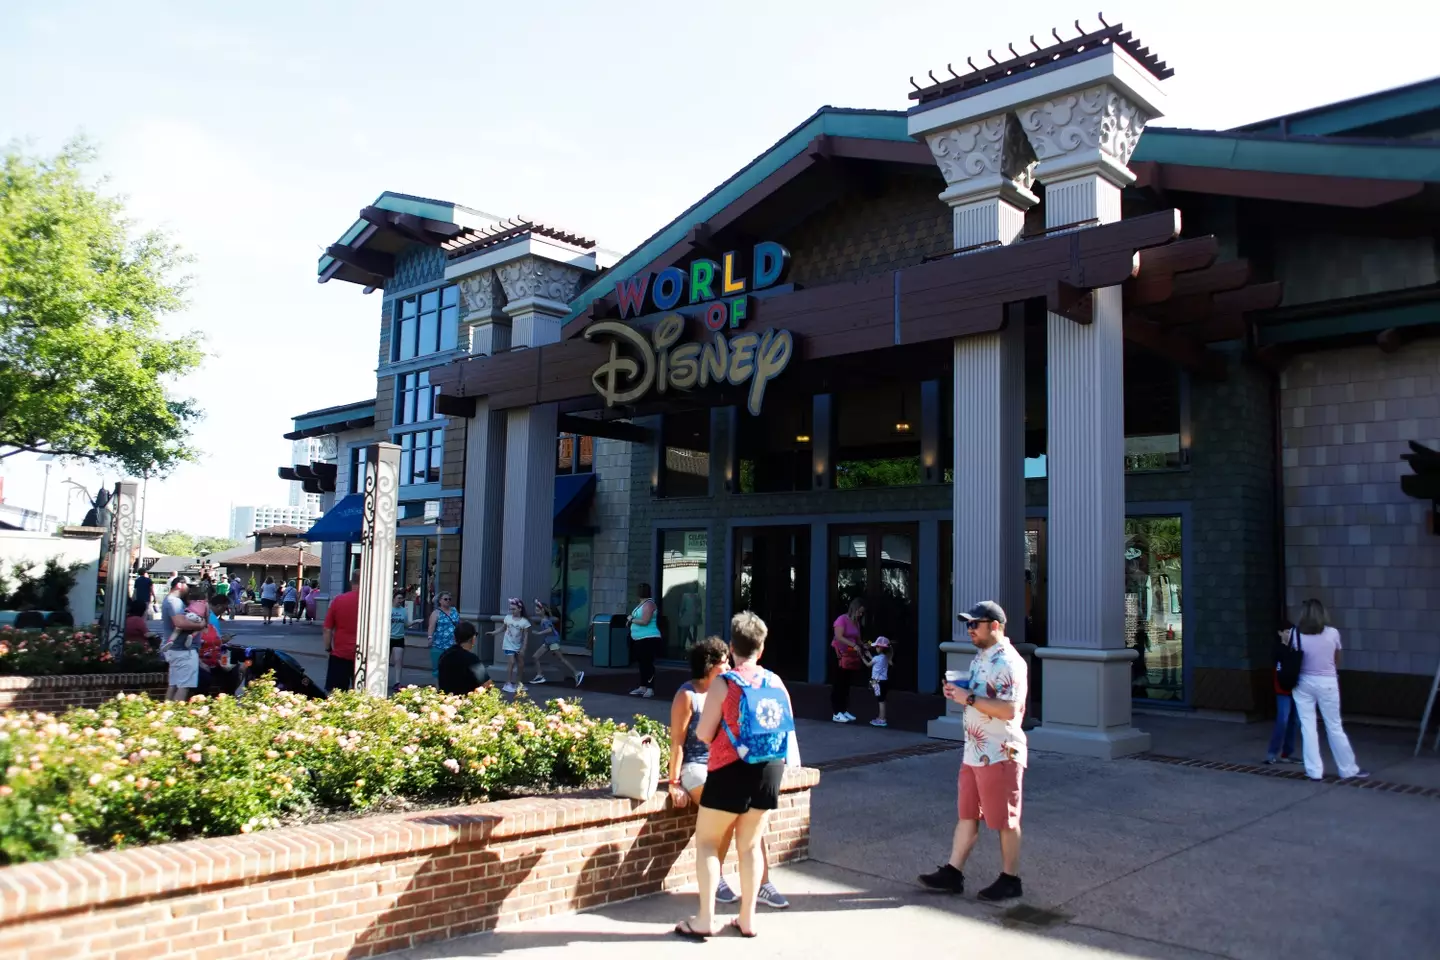 Dr Tangsuan stayed on to shop at Disney Springs after dinner.